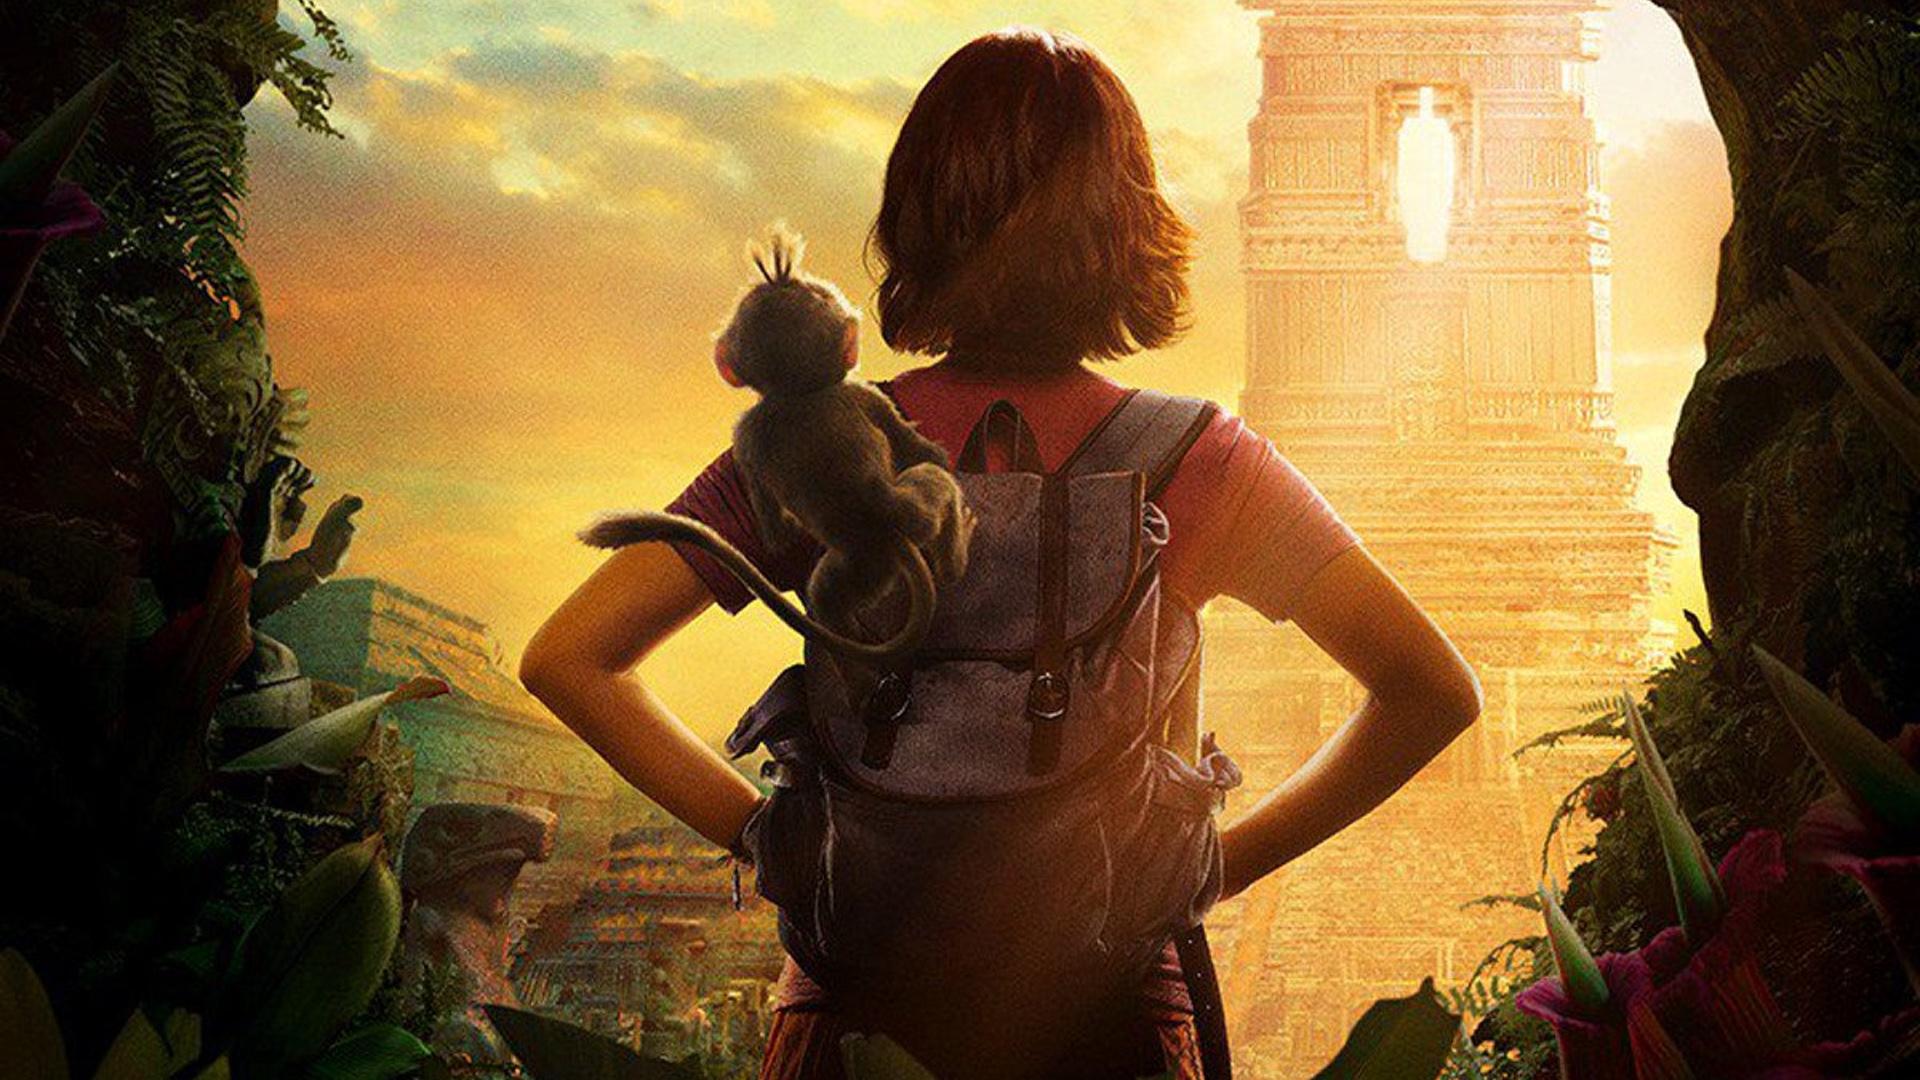 Poster Art For The Live Action Dora The Explorer Film, DORA AND THE